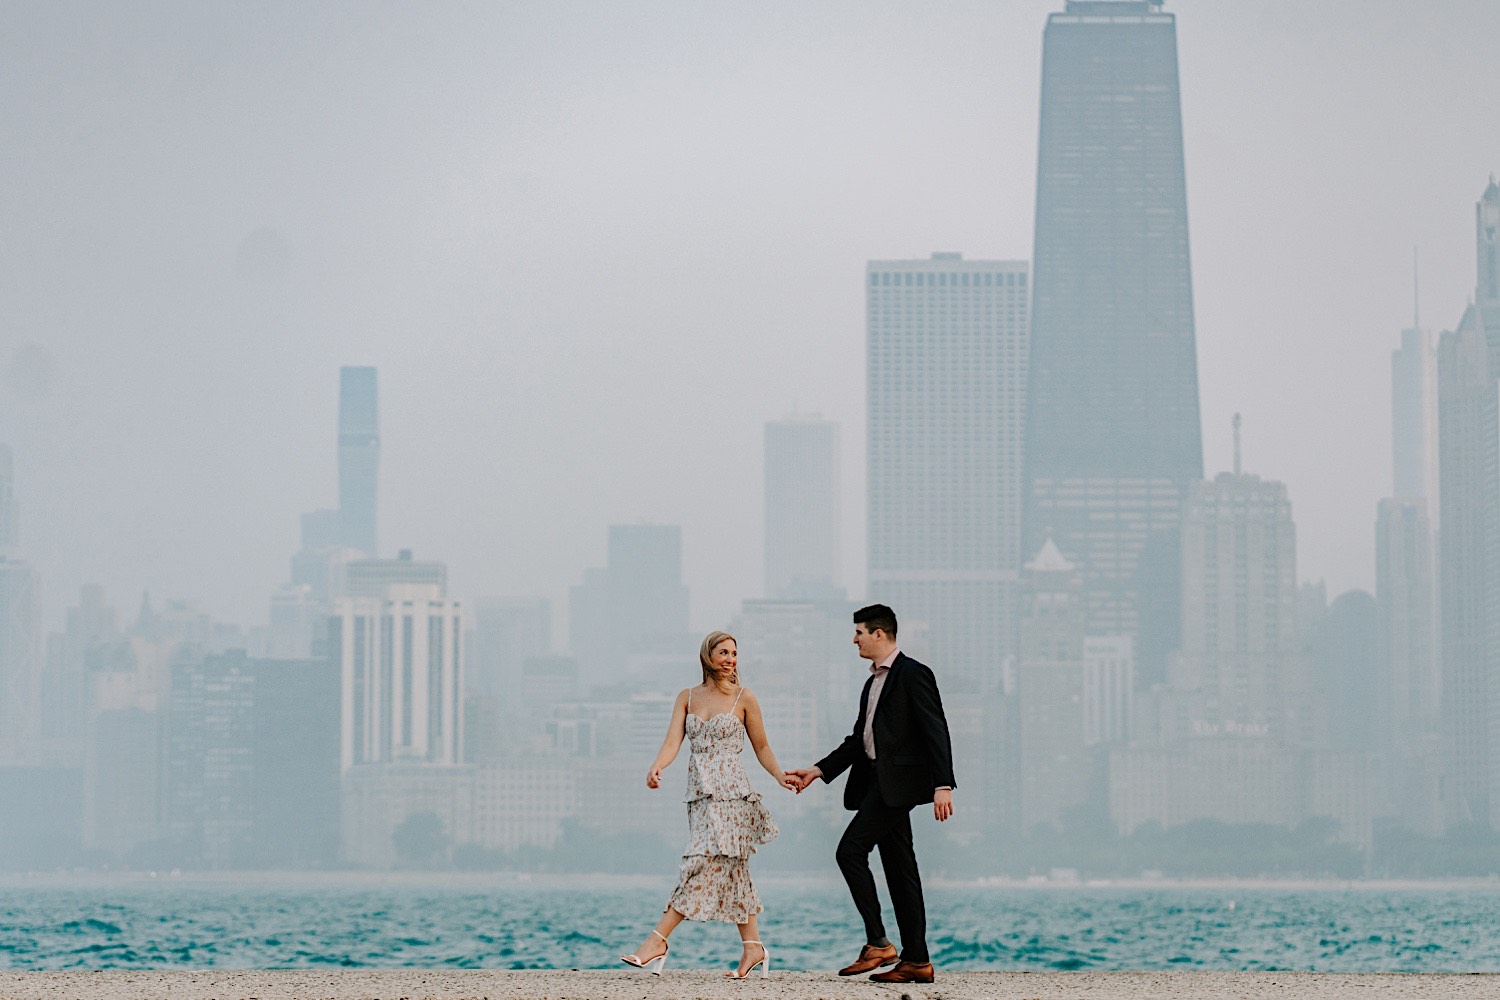 A man and woman walk hand in hand in front of Lake Michigan and the Chicago skyline behind them while the woman smiles back at the man